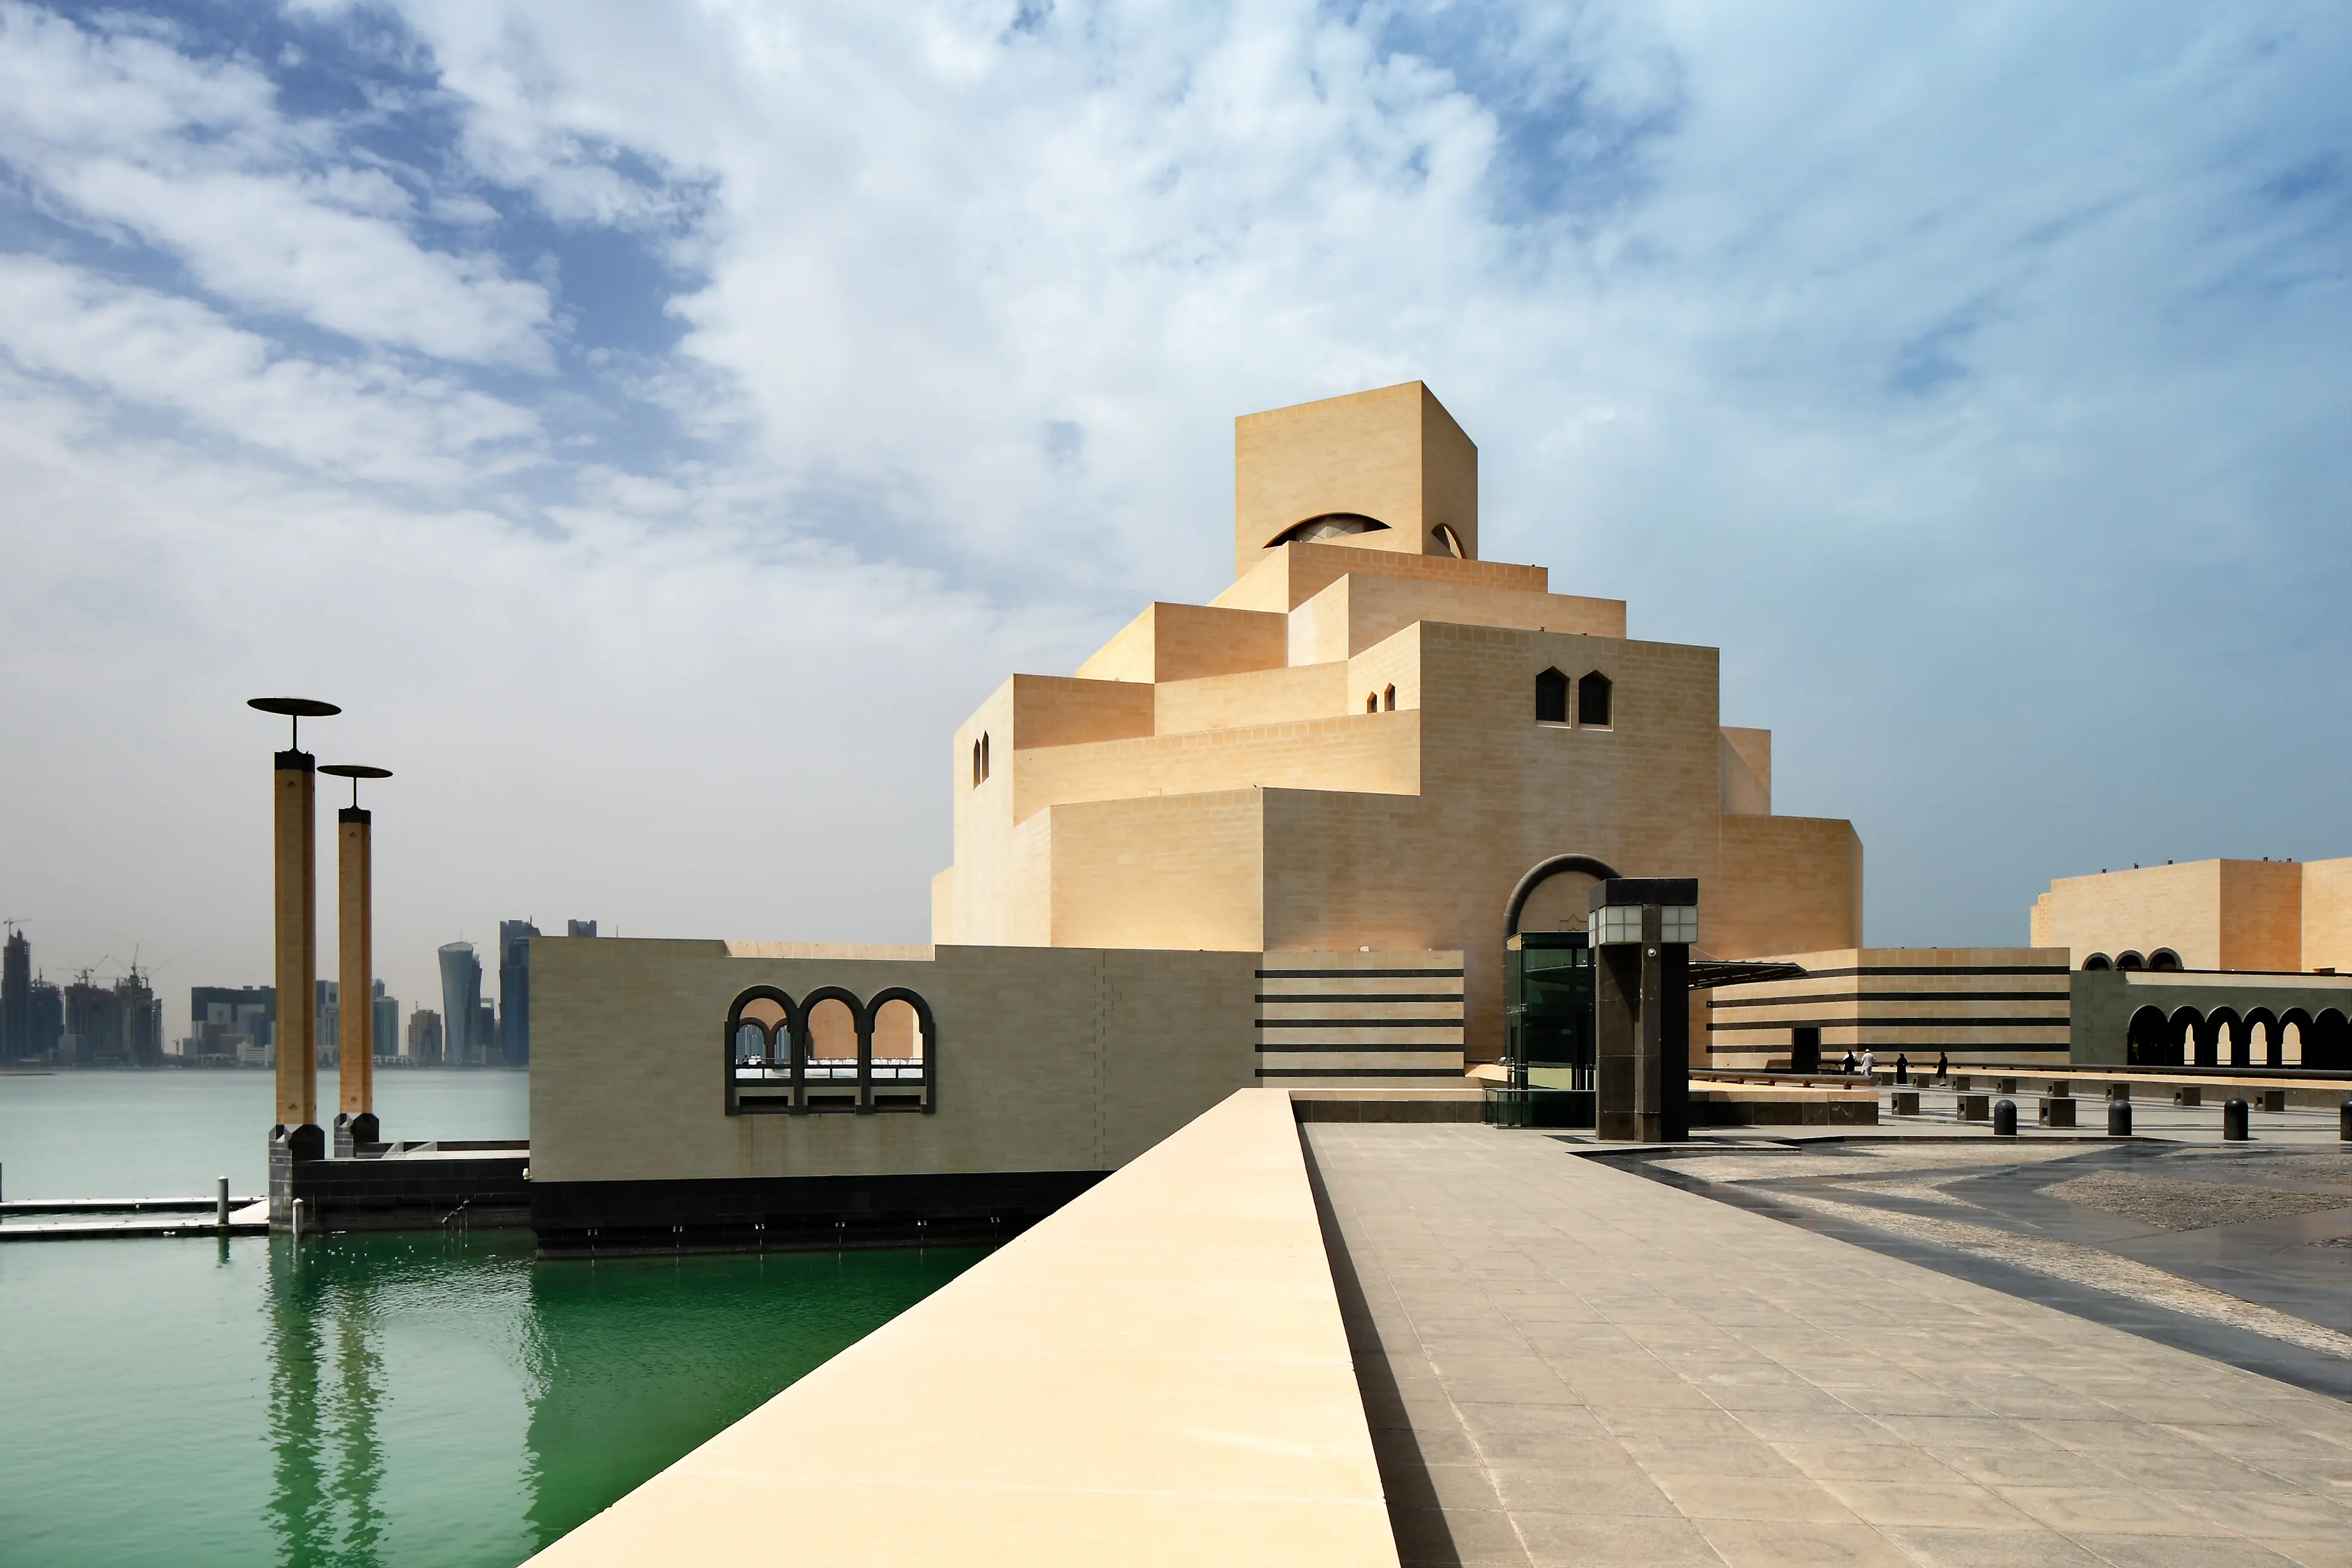 3-Day Romantic Shopping and Sightseeing Adventure in Doha